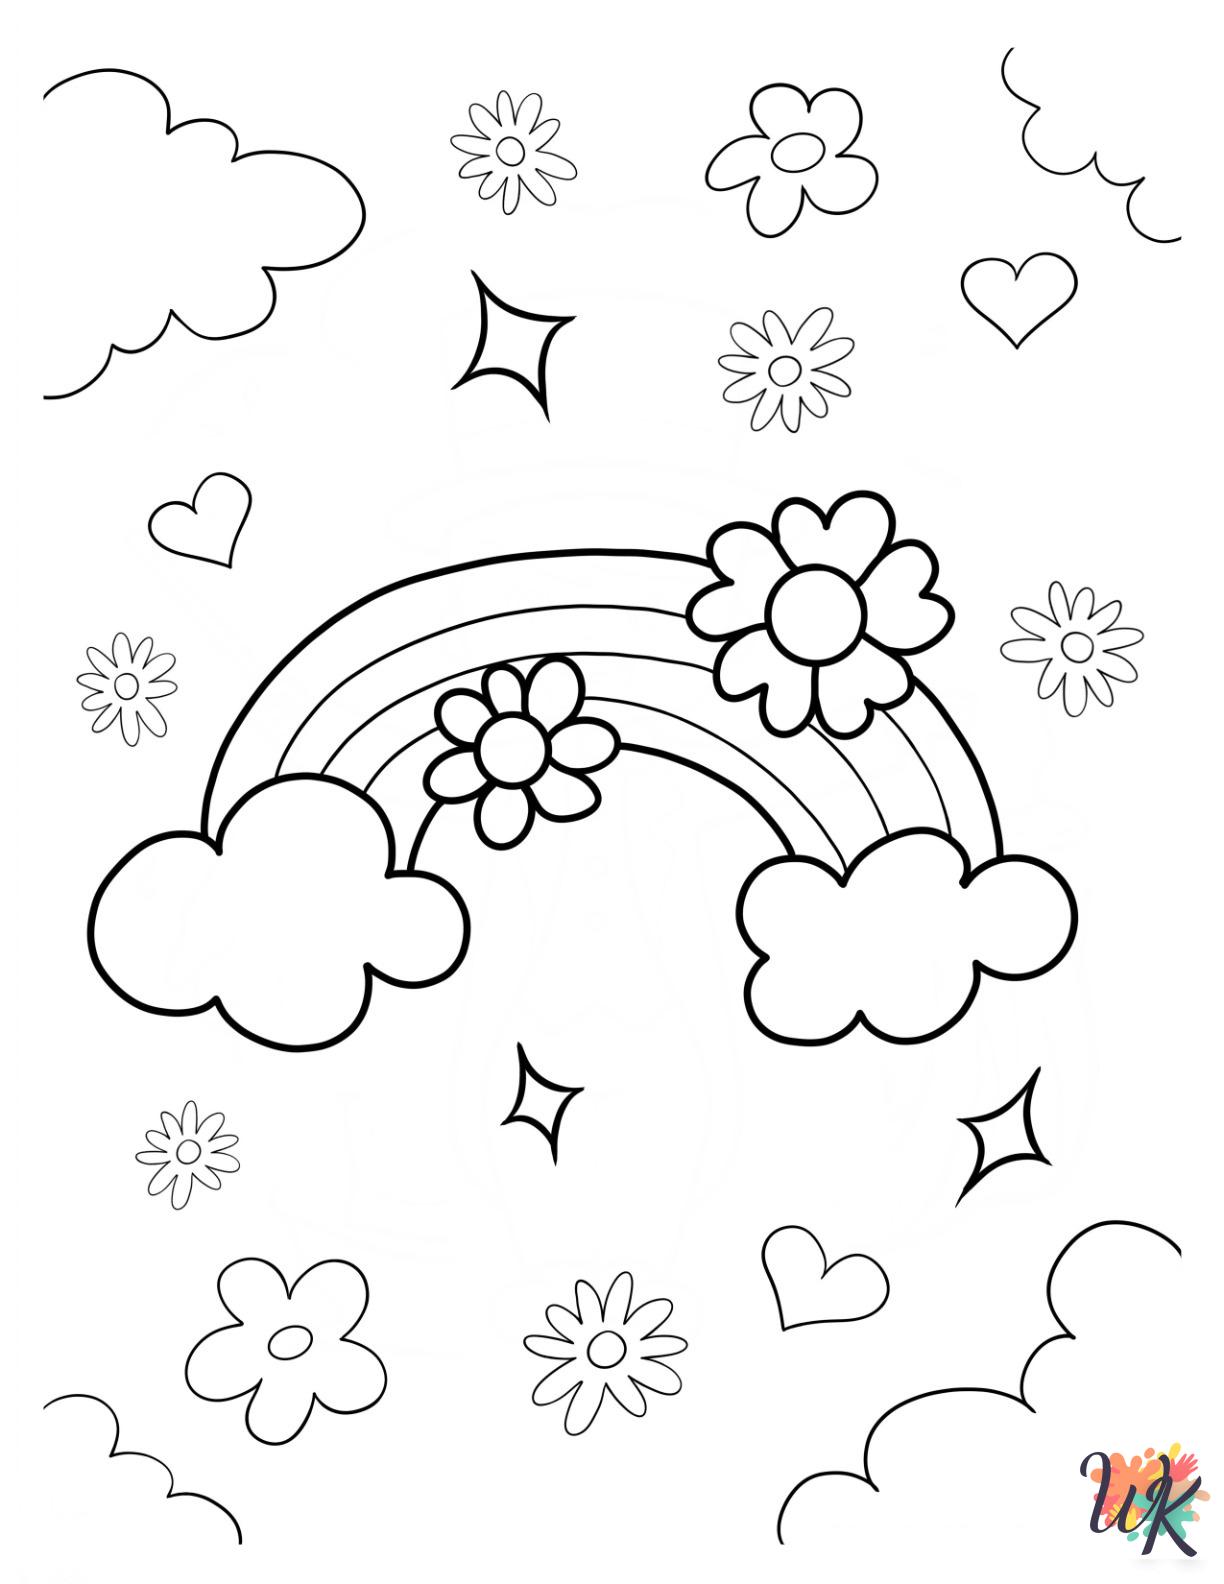 Spring coloring book pages